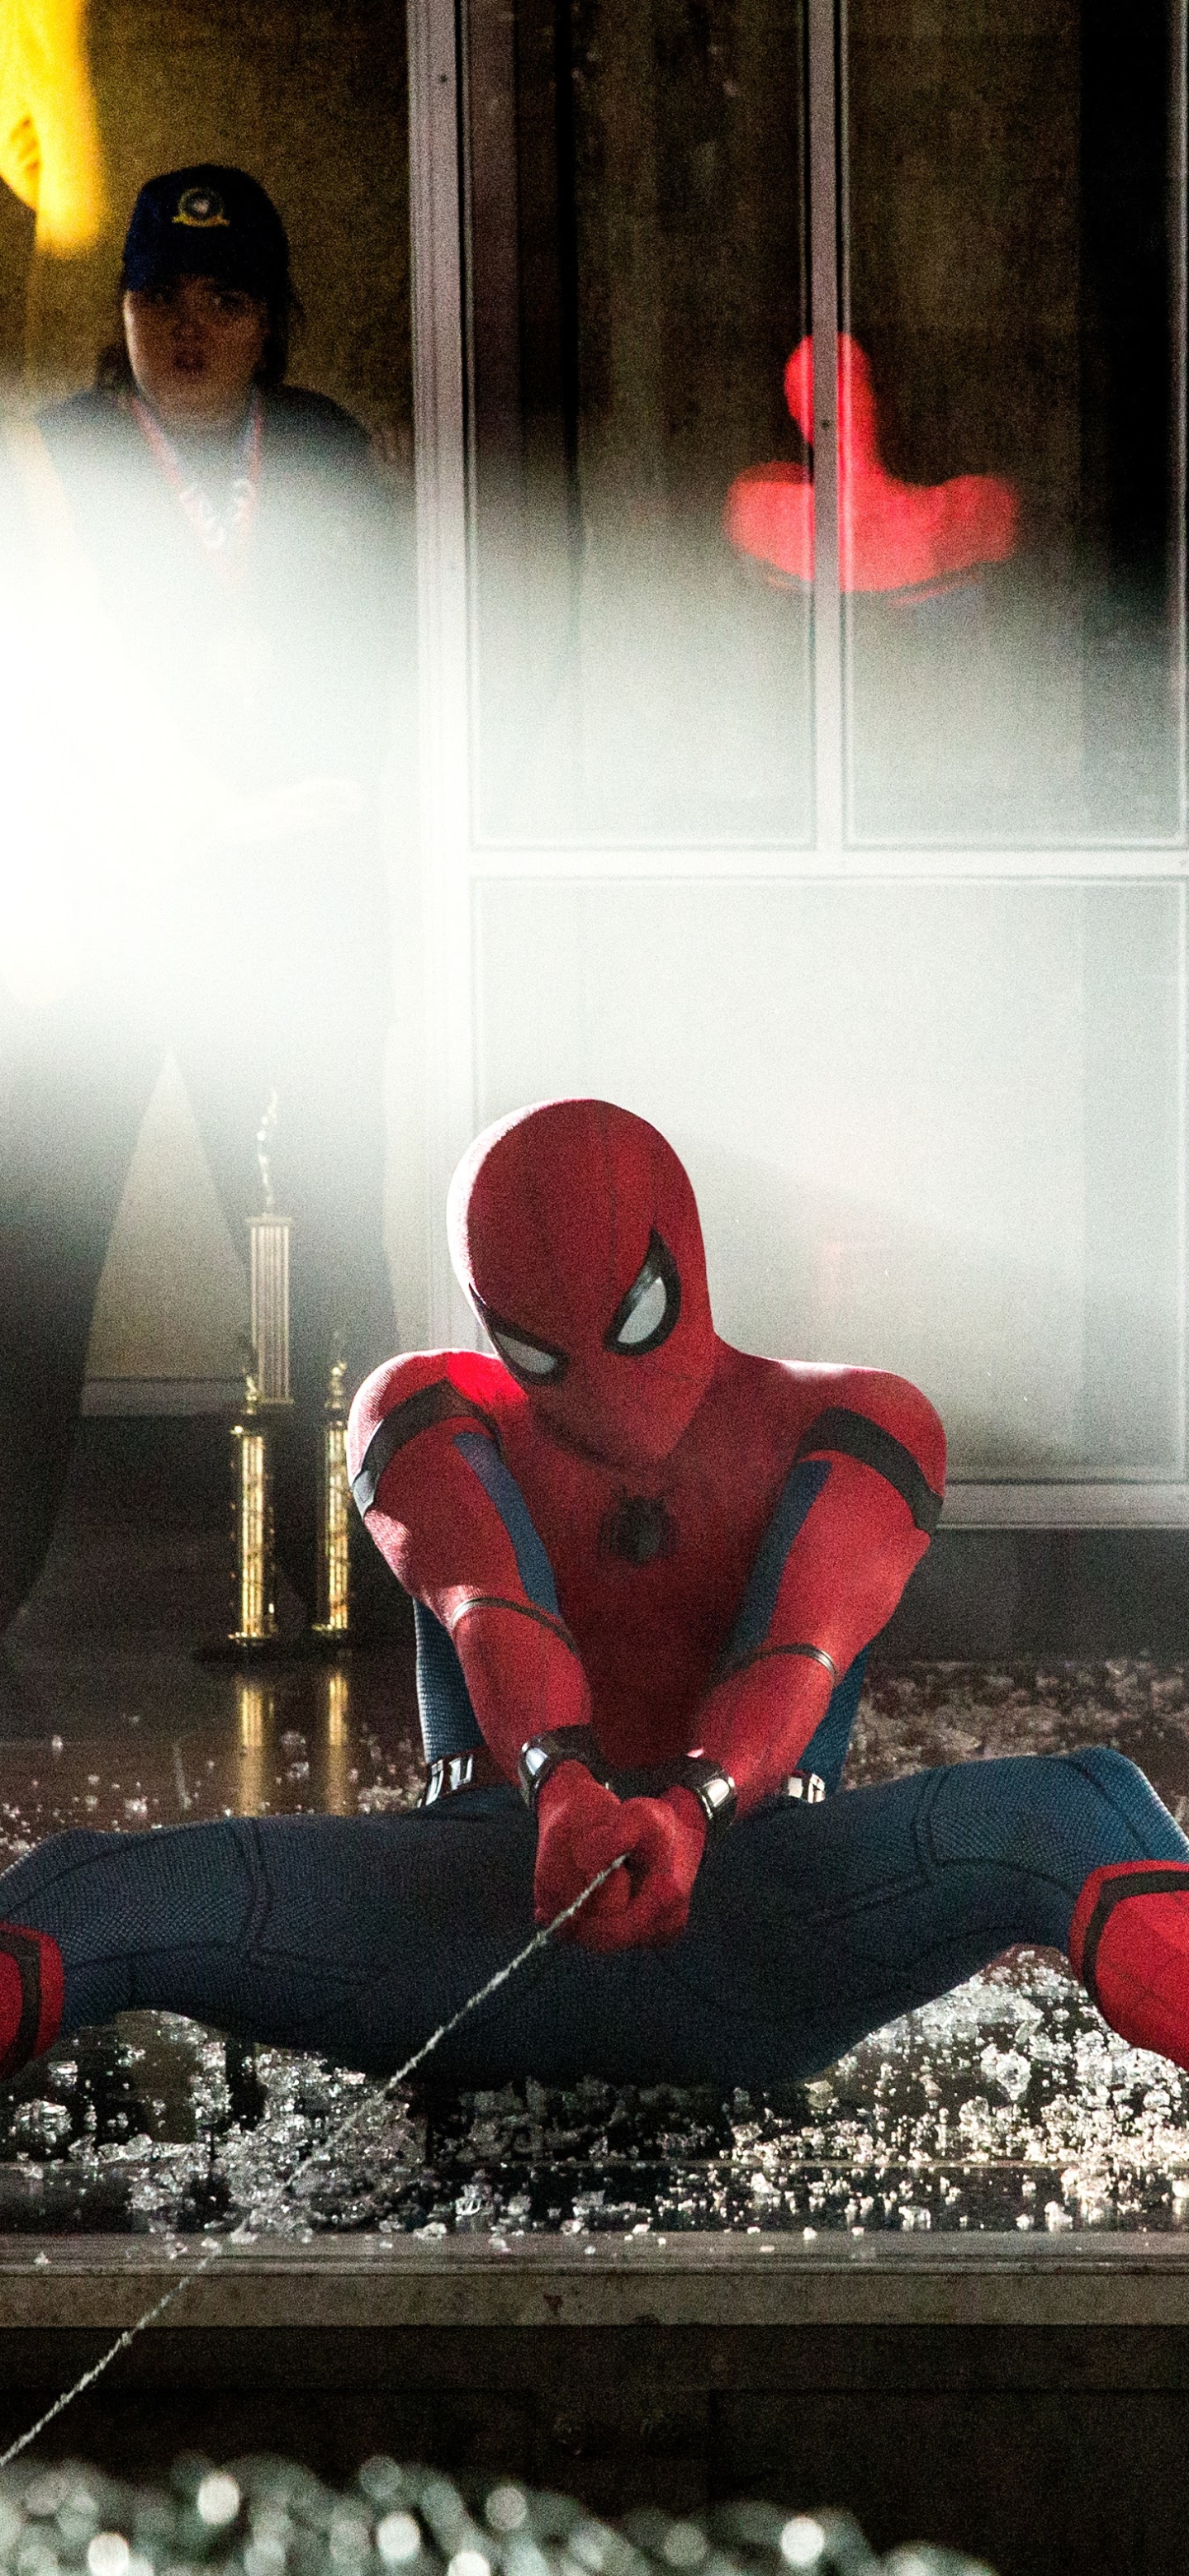 HD for desktop 1080p Spider Man: Homecoming 